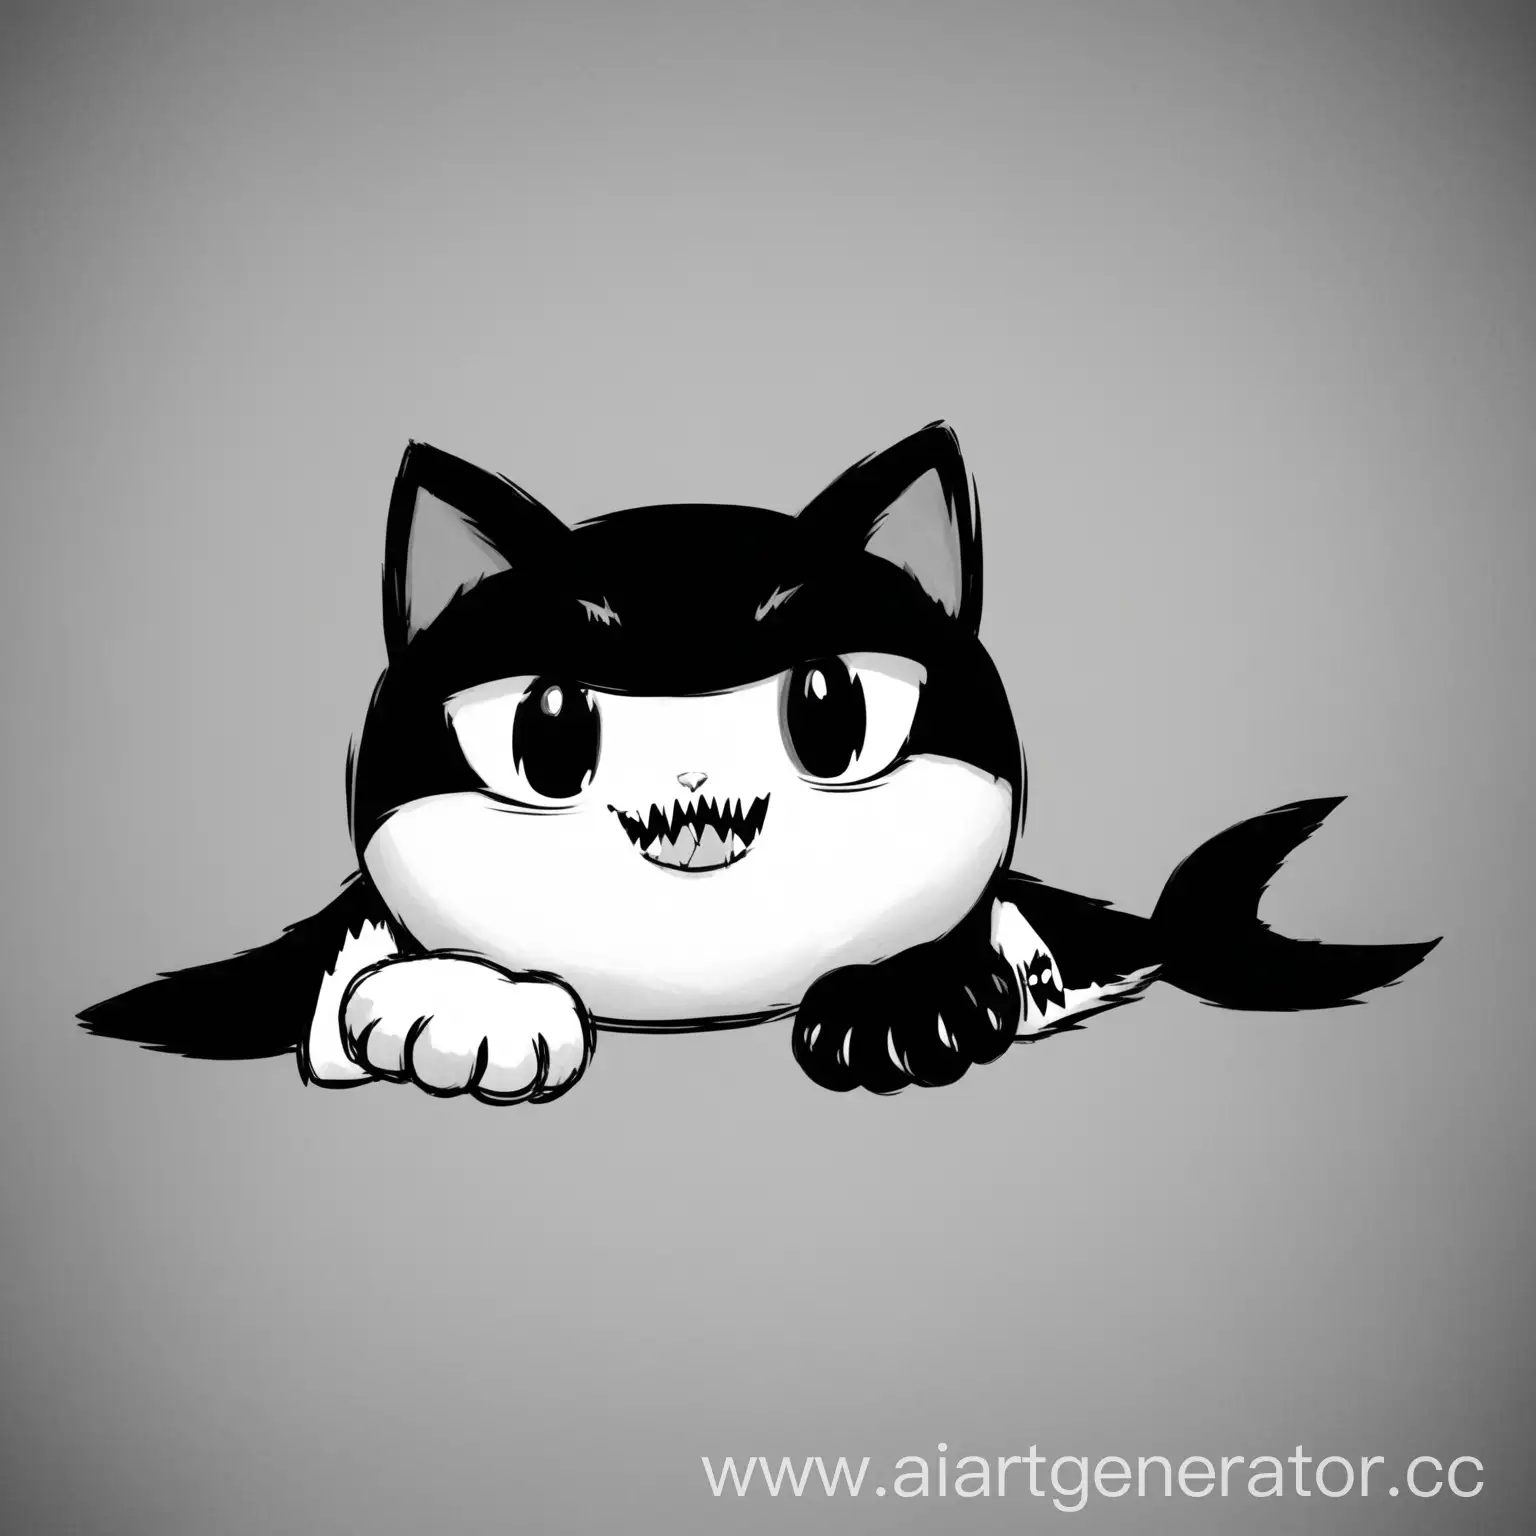 Monochrome-Shark-with-Feline-Eyes-and-Paws